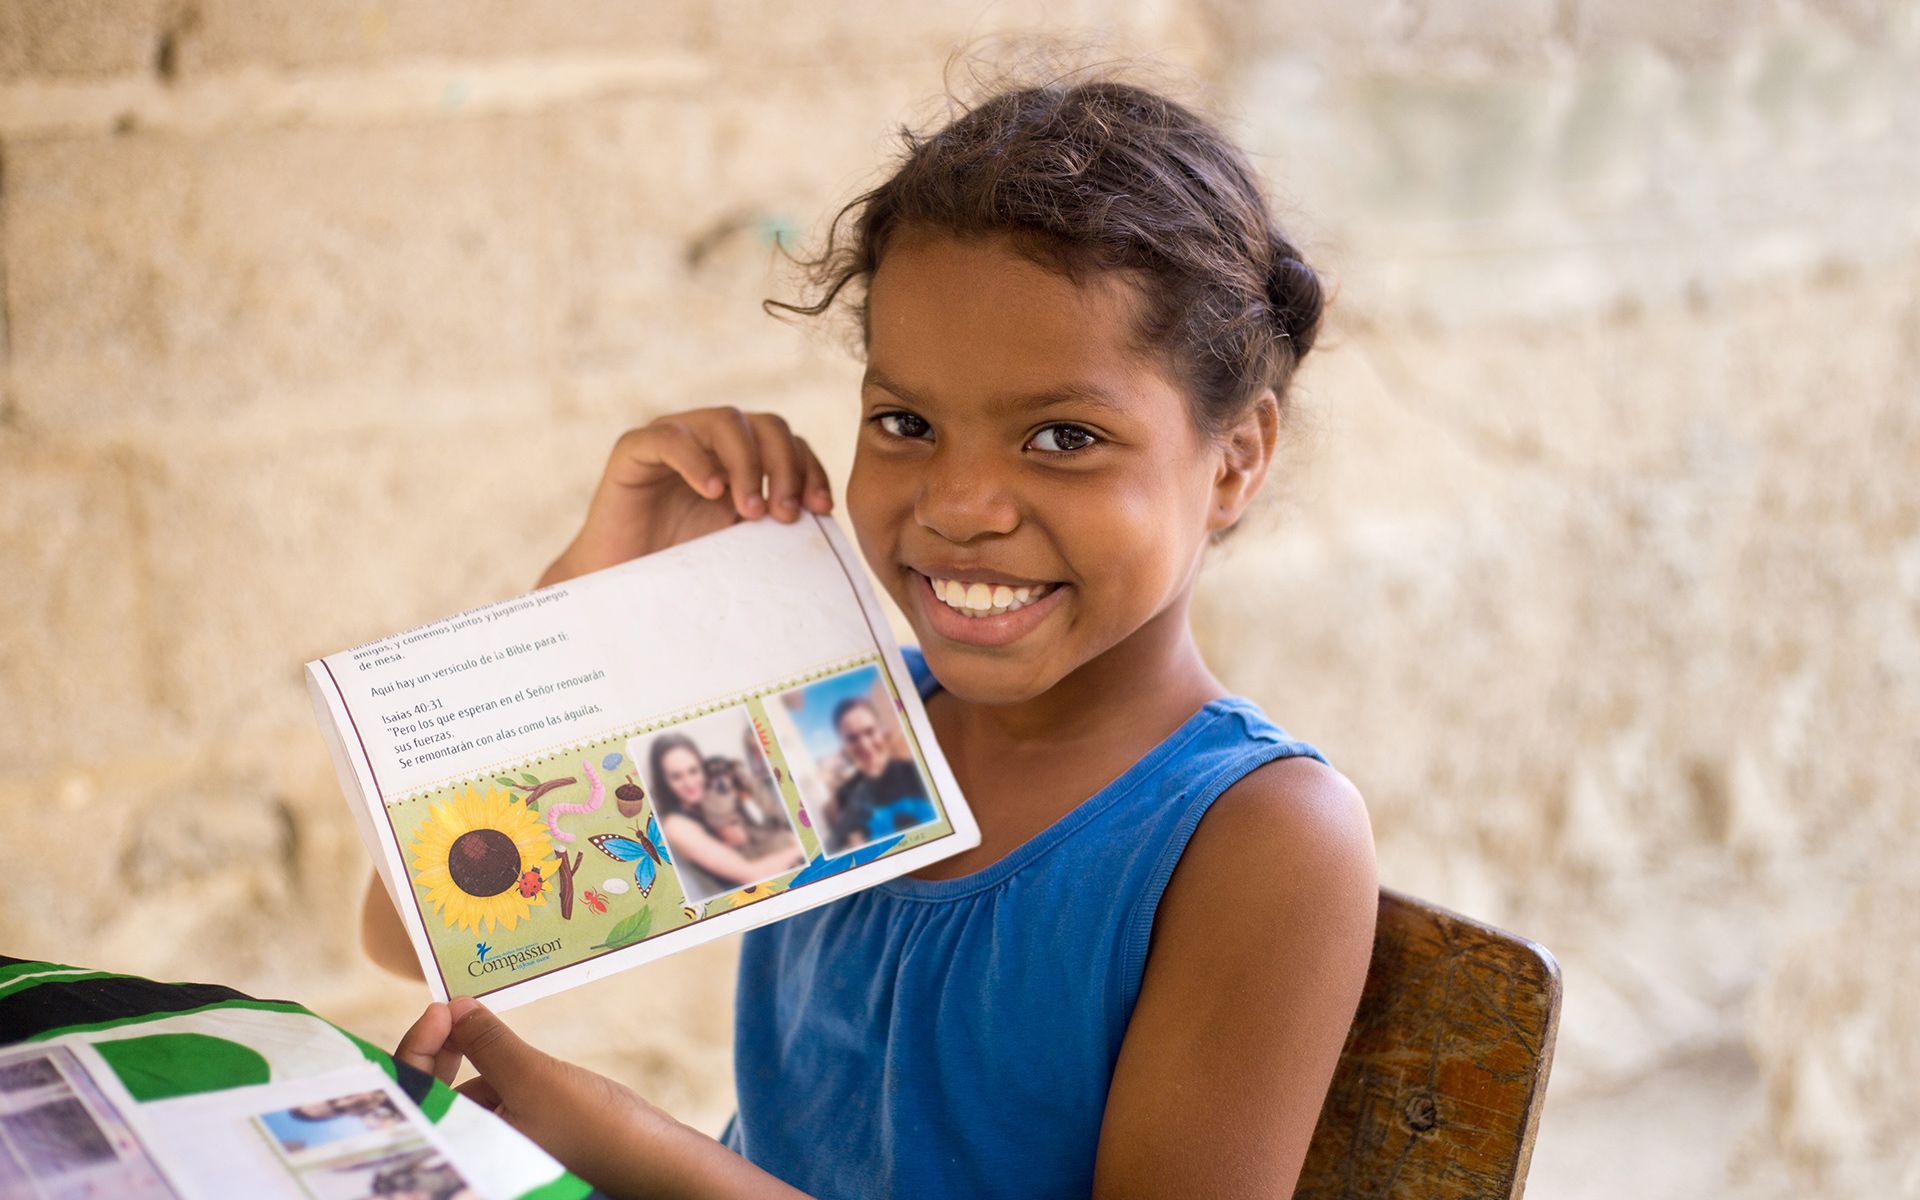 Sharith, a girl in Colombia, shows a letter from her sponsor